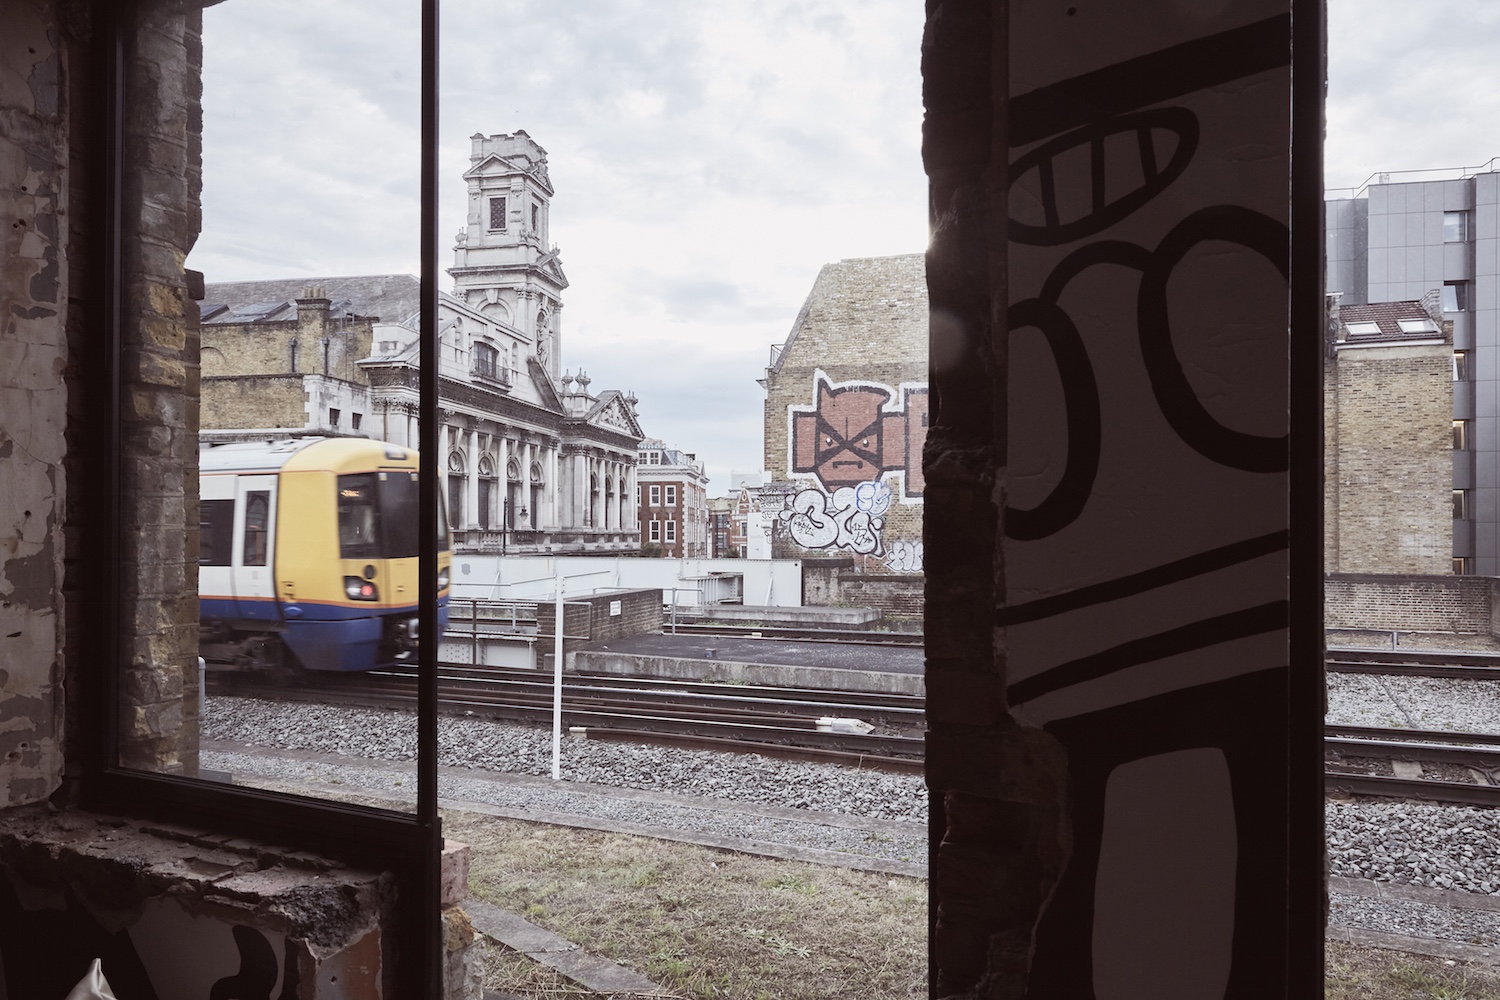 shoreditch-platform-lounge-view-to-trainline-from-old-platform-with-train